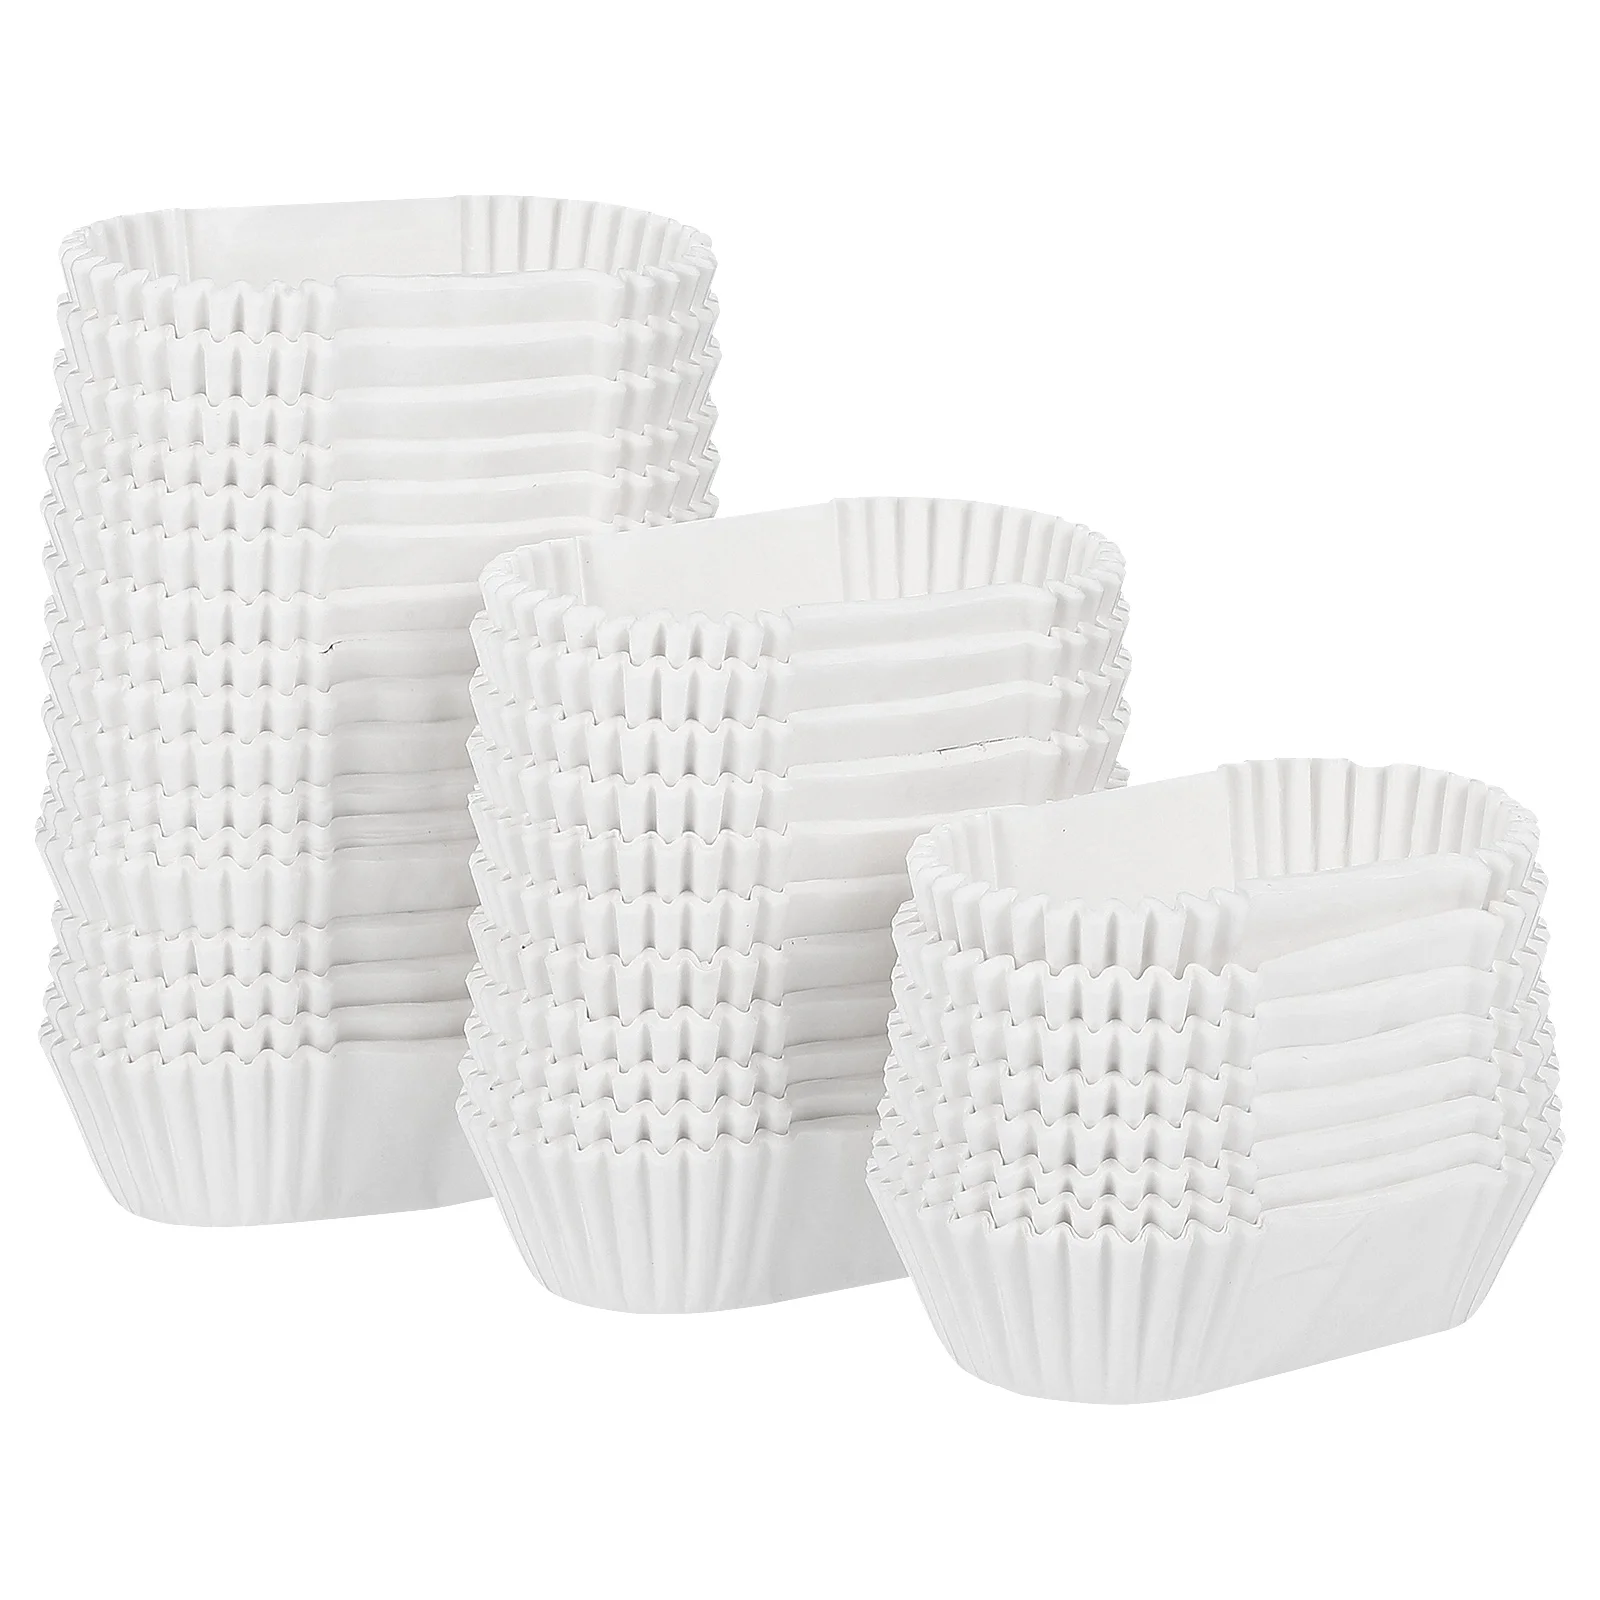 

1000 Pcs Bread Paper Tray Disposable Dessert Bowls Small Cup Grease Proof Cupcake Liners Baking Wraps Underpads